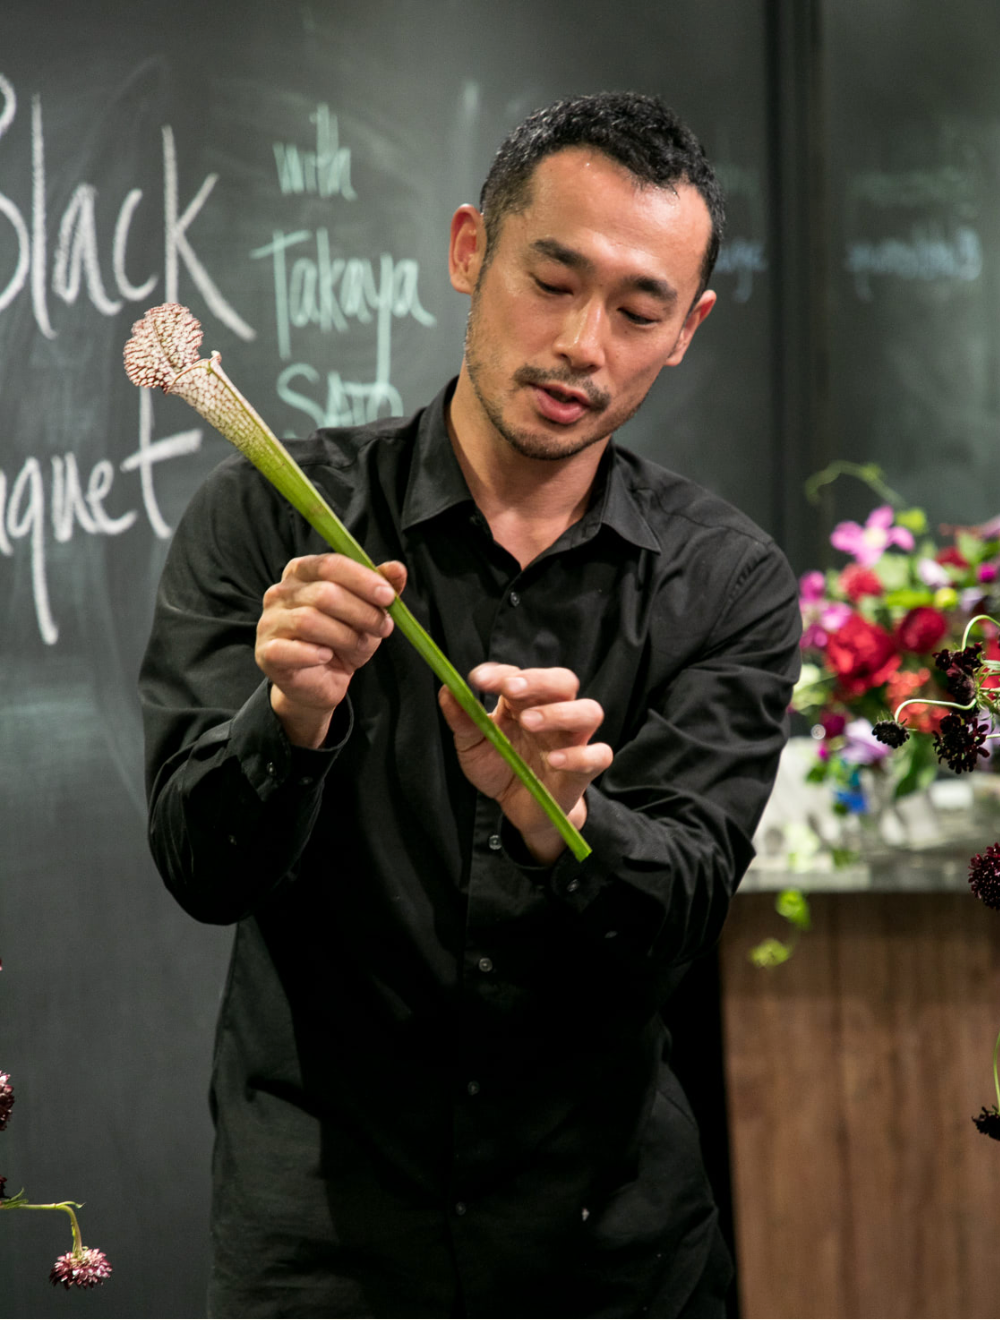 Takaya Sato holding a flower stem to show students how to arrange it in a vase.